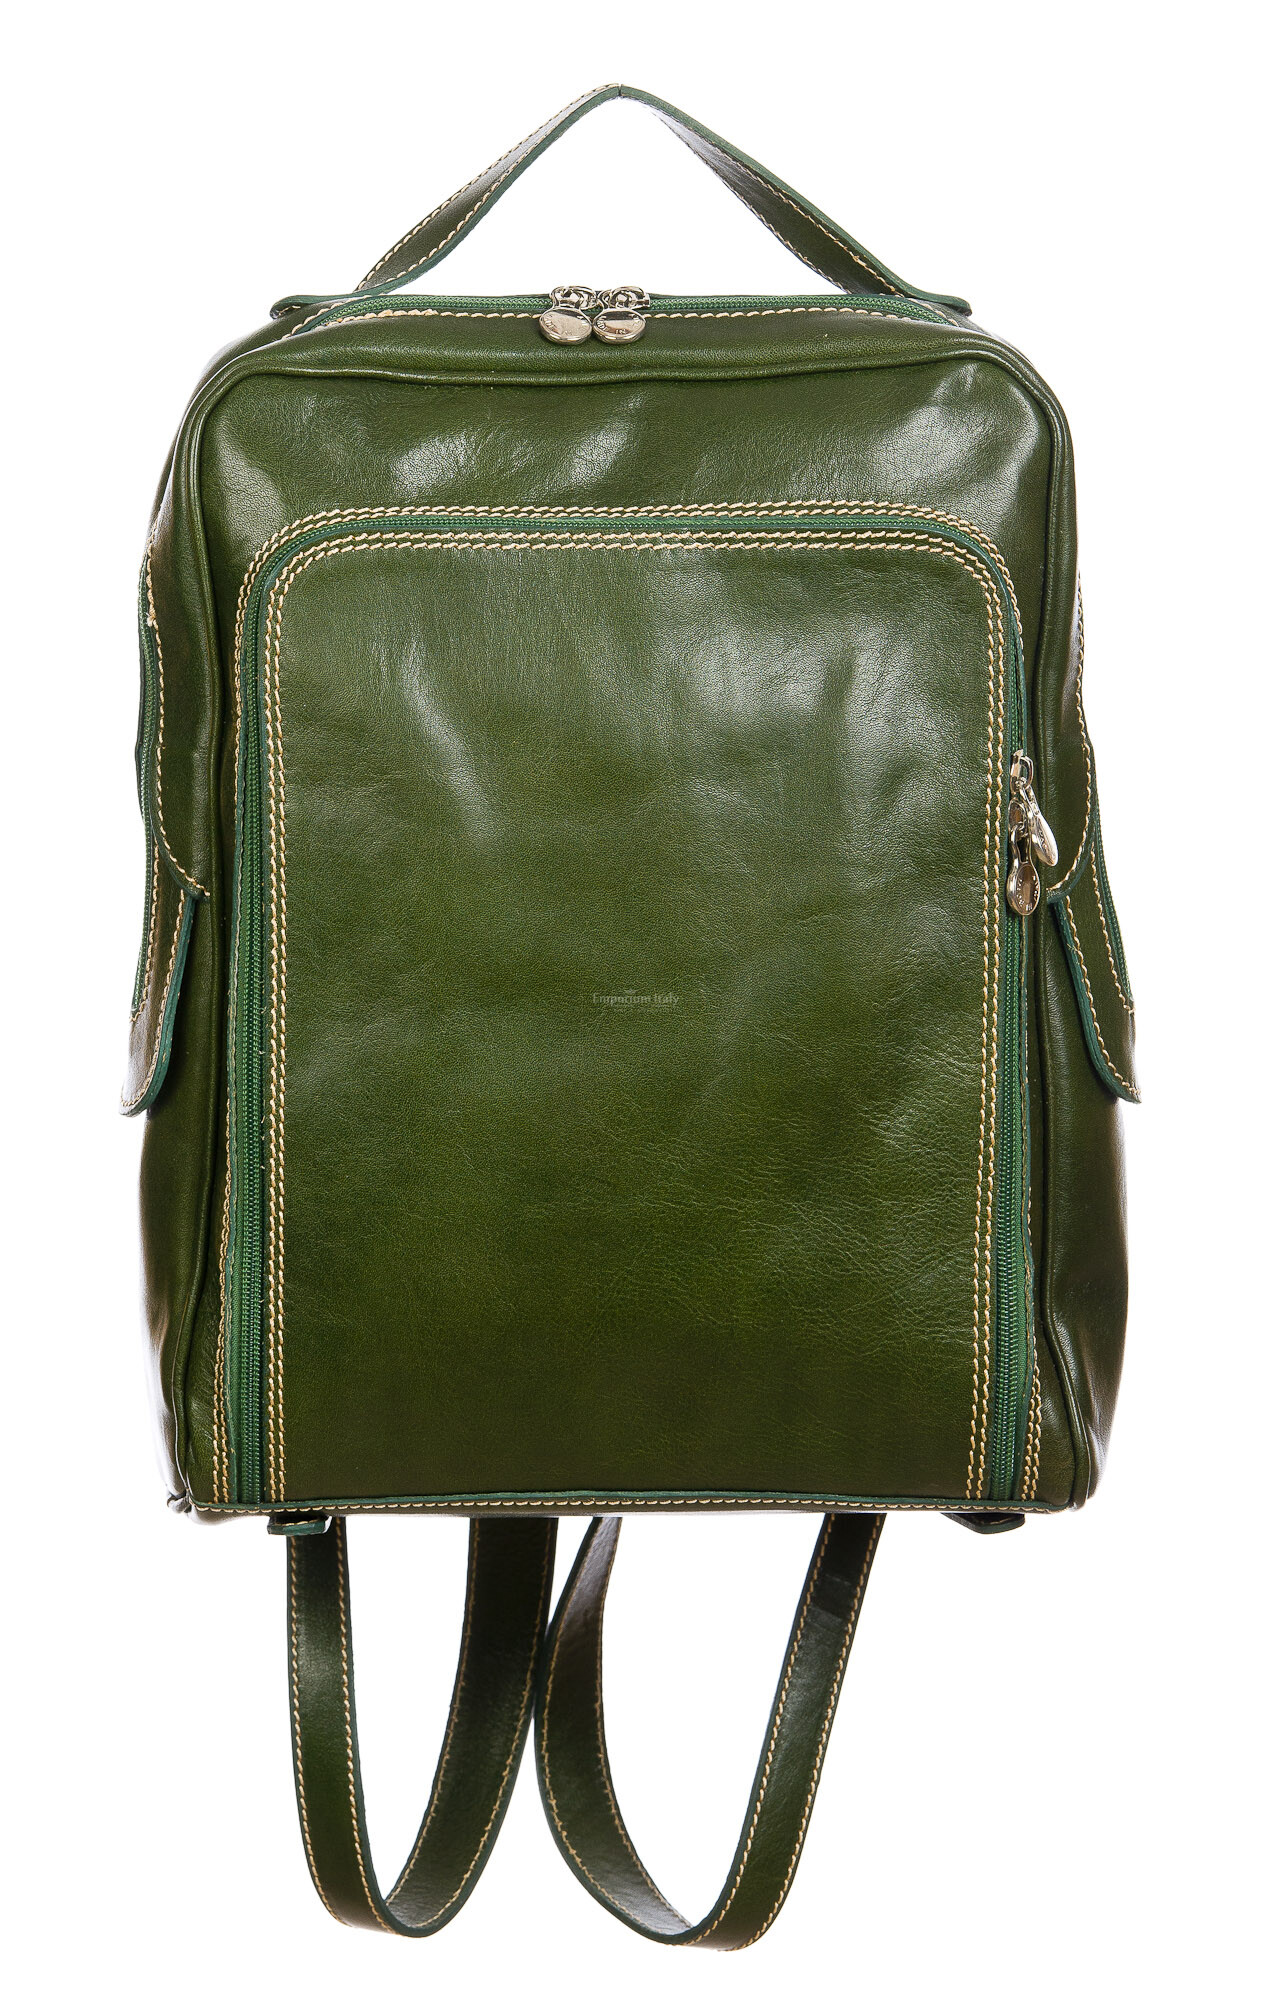 MONTE BIANCO MAXI : men's/women's backpack, genuine buffered leather, color  : GREEN, Made in Italy, RECOMMENDED